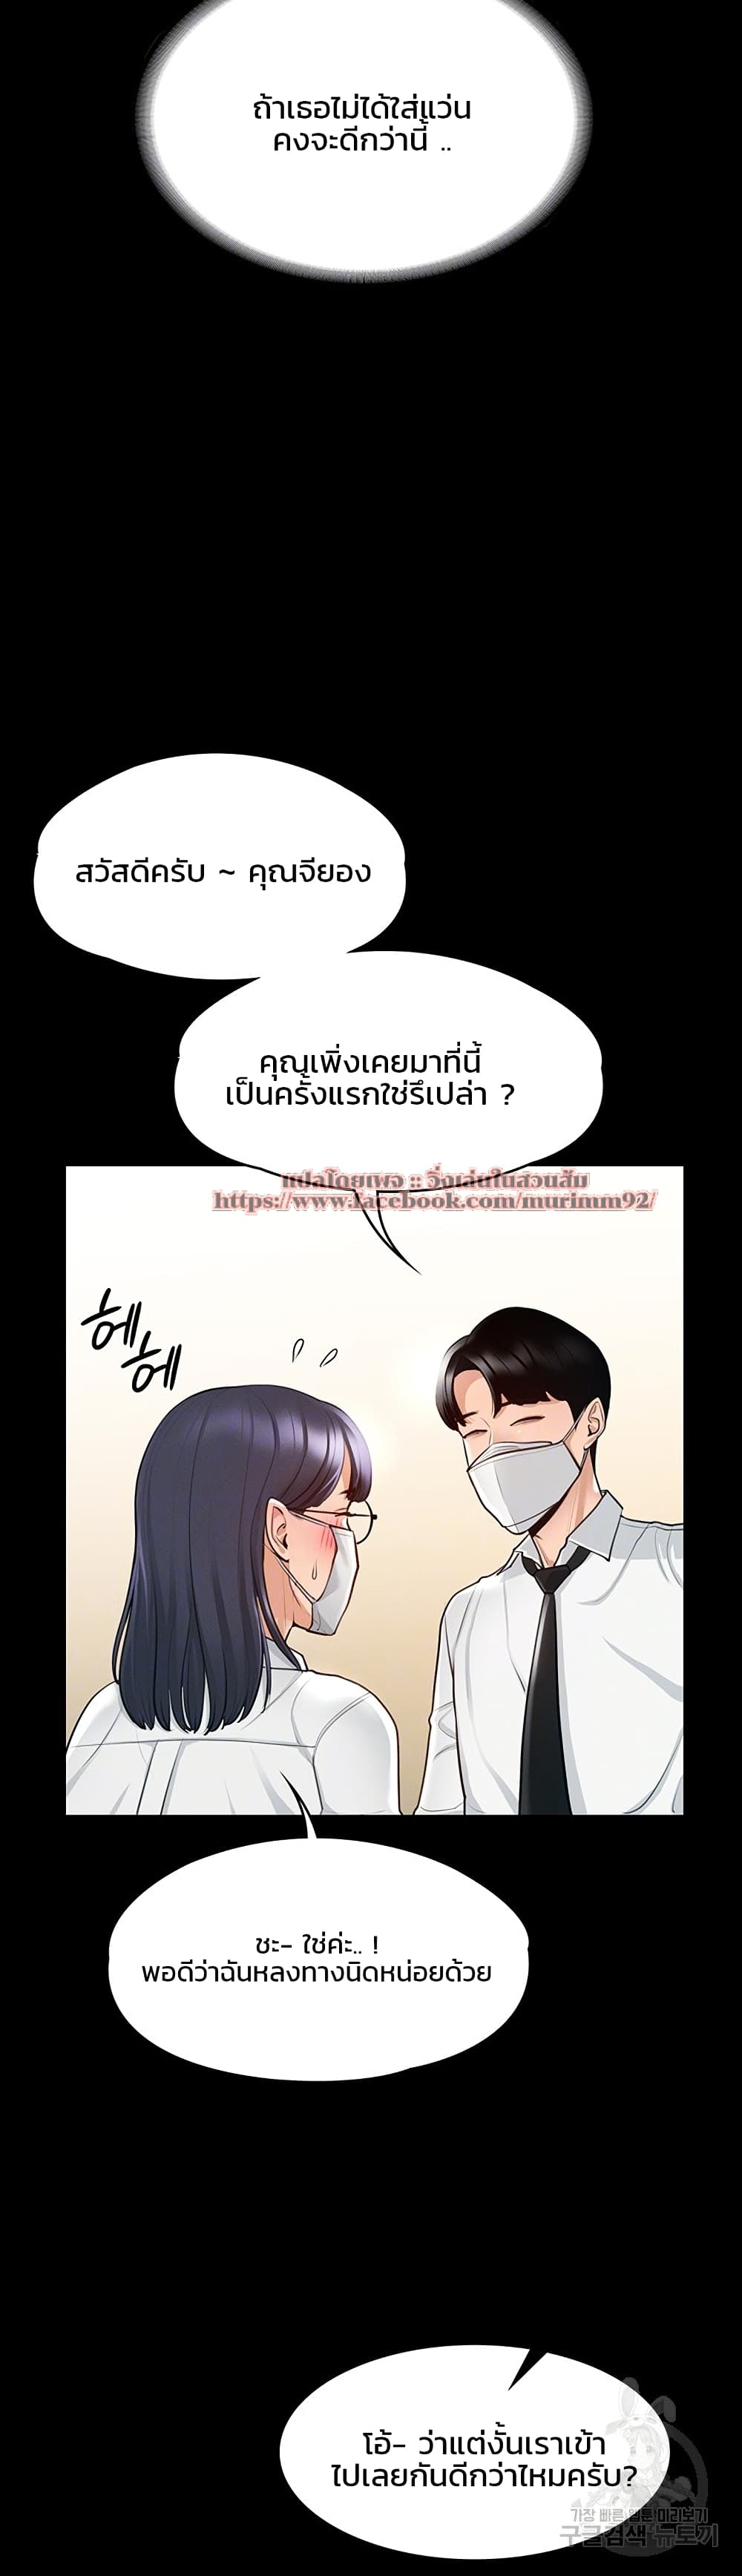 Workplace Manager Privileges ตอนที่ 3 ภาพ 7